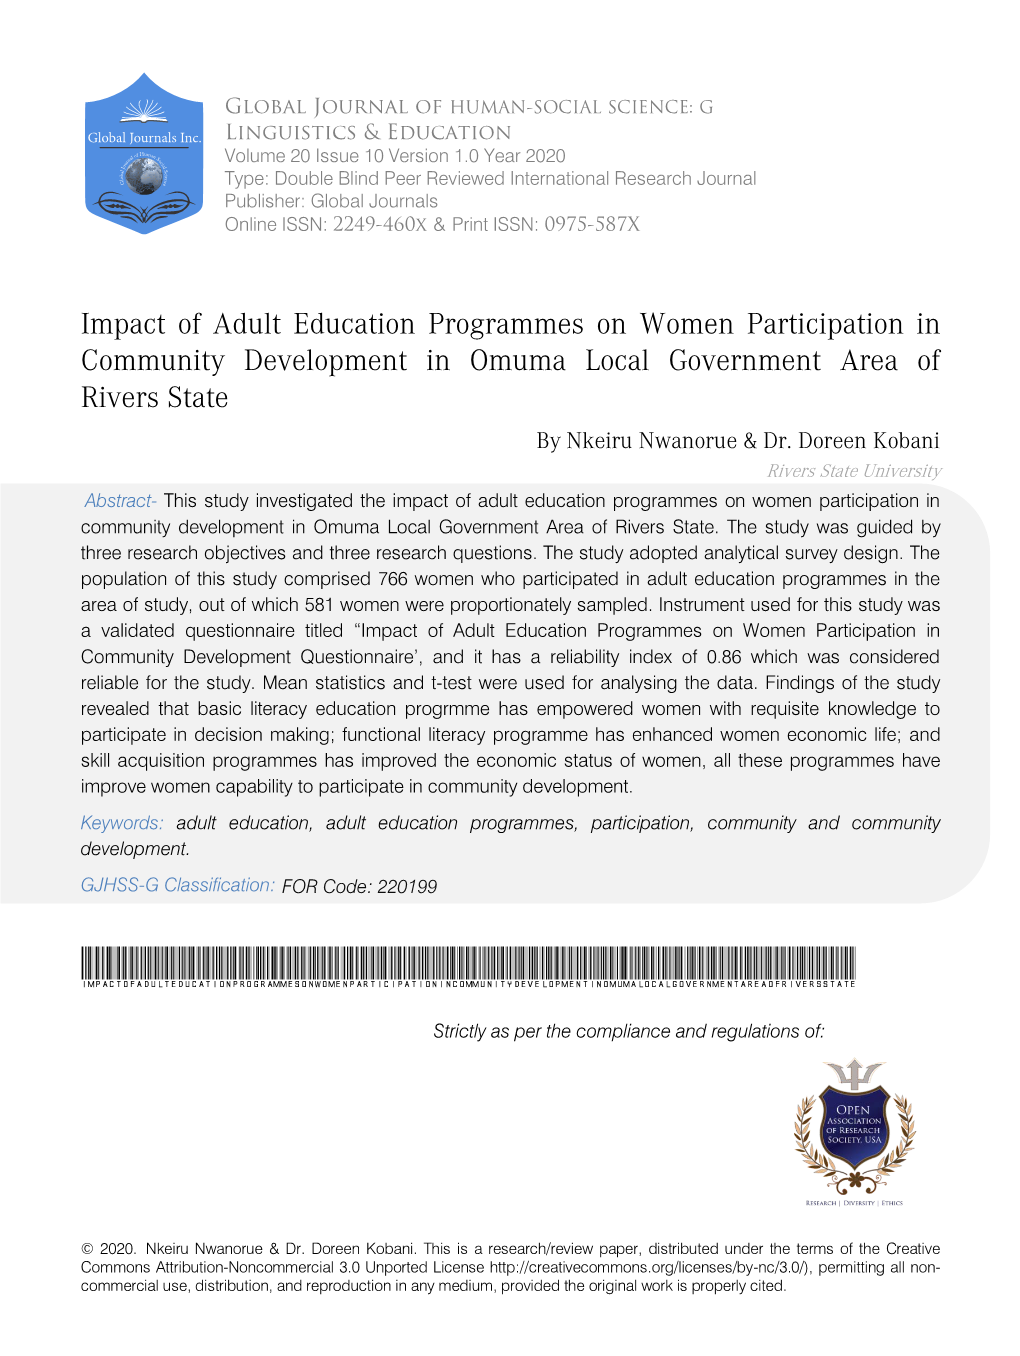 Impact of Adult Education Programmes on Women Participation in Community Development in Omuma Local Government Area of Rivers State by Nkeiru Nwanorue & Dr